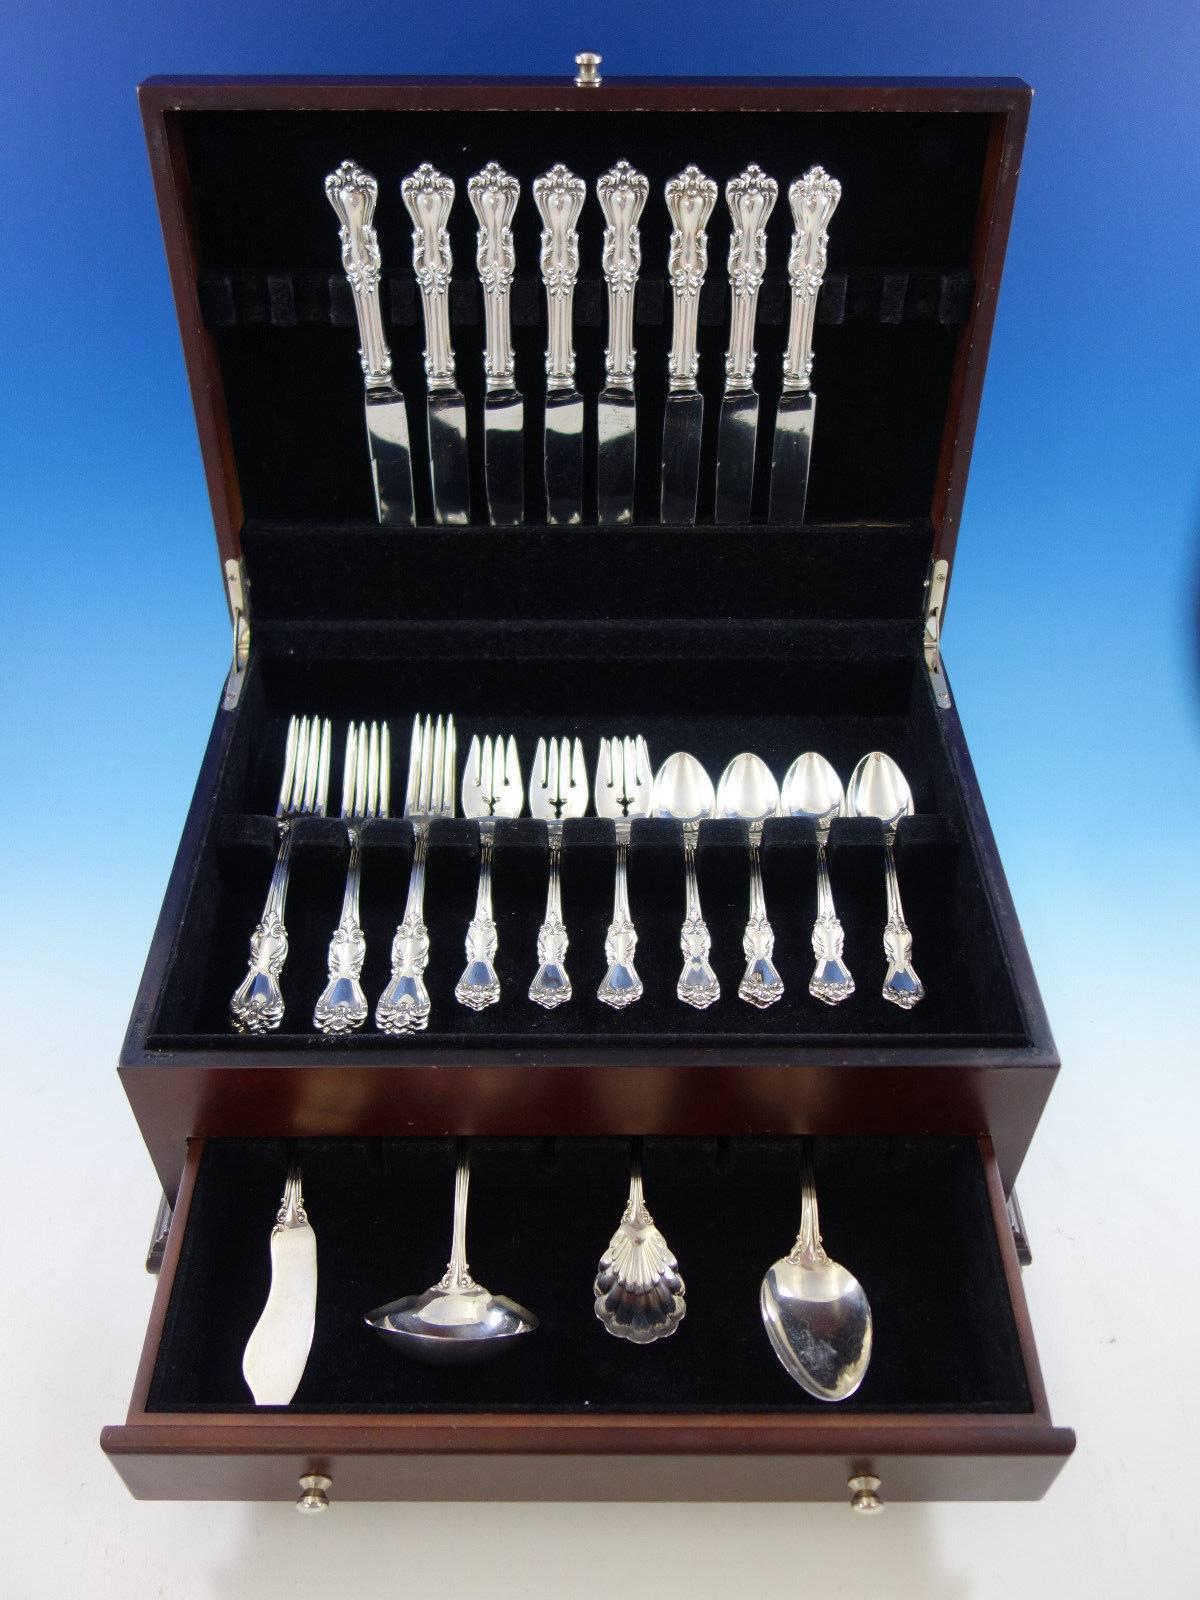 Marlborough by Reed and Barton sterling silver flatware set of 36 pieces. This set includes: 

Eight knives, 9 1/4